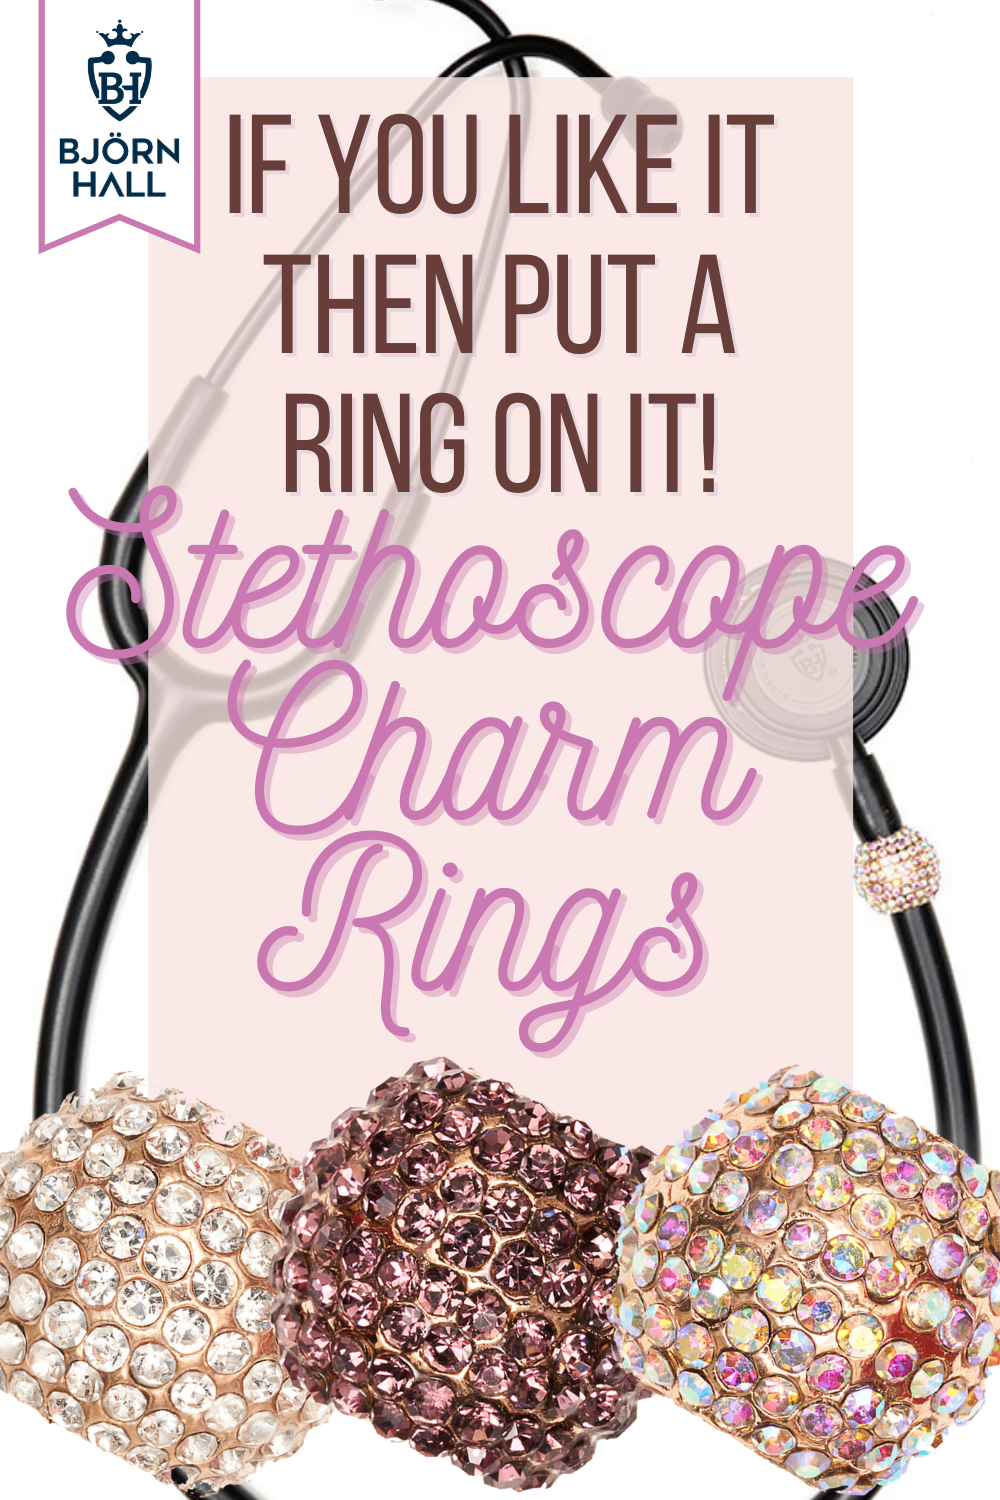 How To Put On Your Stethoscope Charm Rings